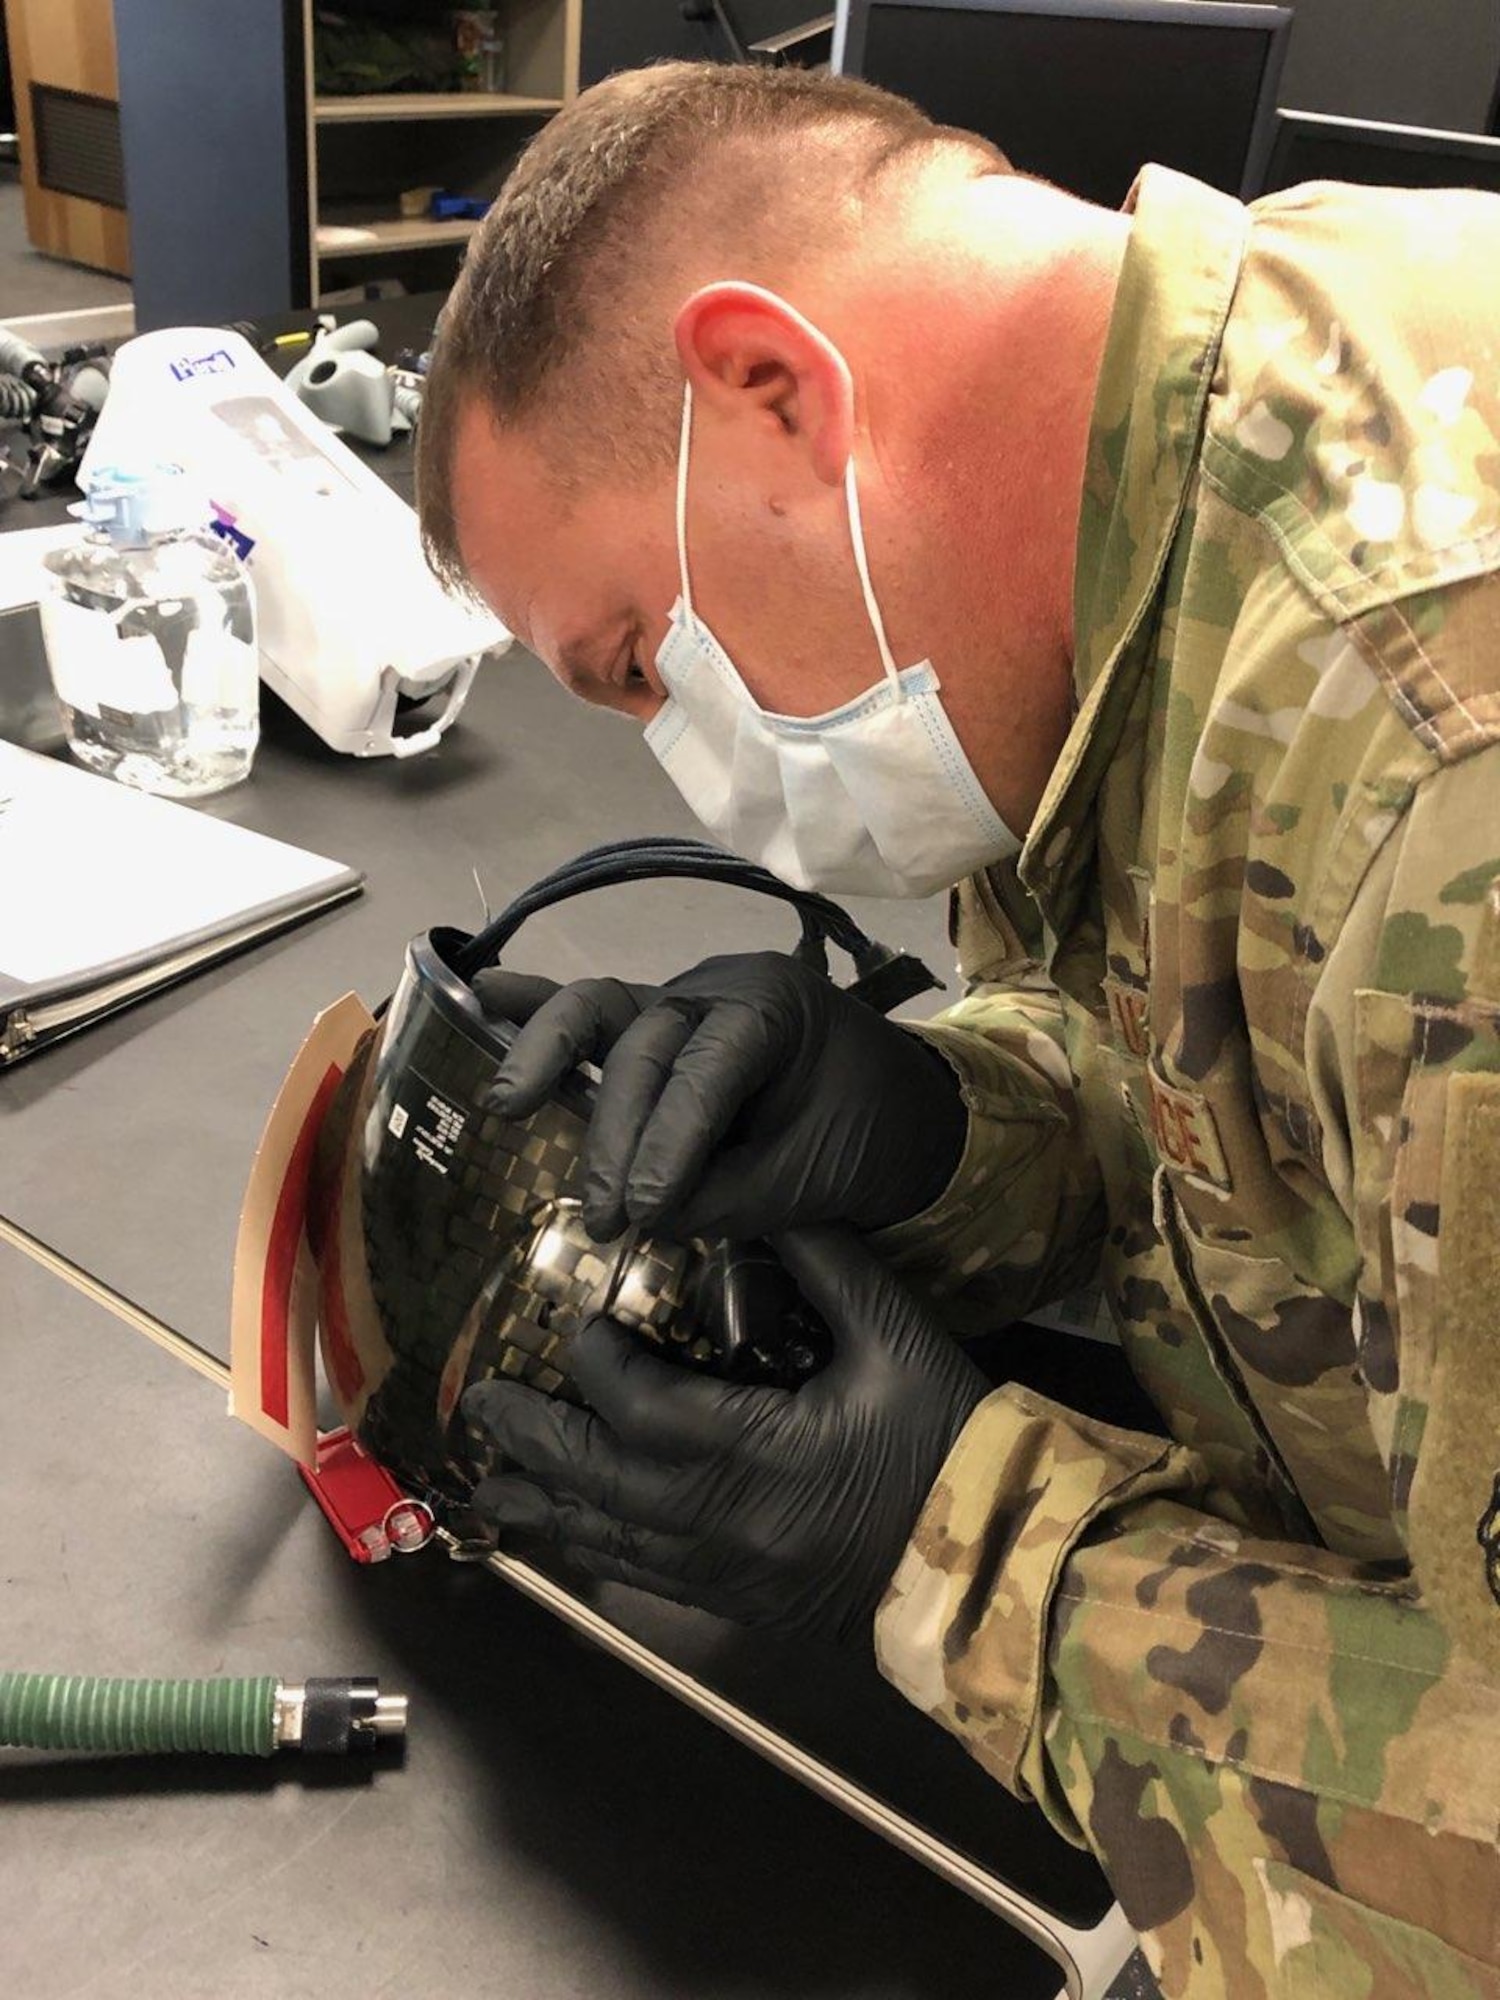 Tech. Sgt. William Vass from the Aircrew Flight Equipment shop in the 419th Operations Support Squadron processes a damaged Helmet Display Unit for supply turn-in.